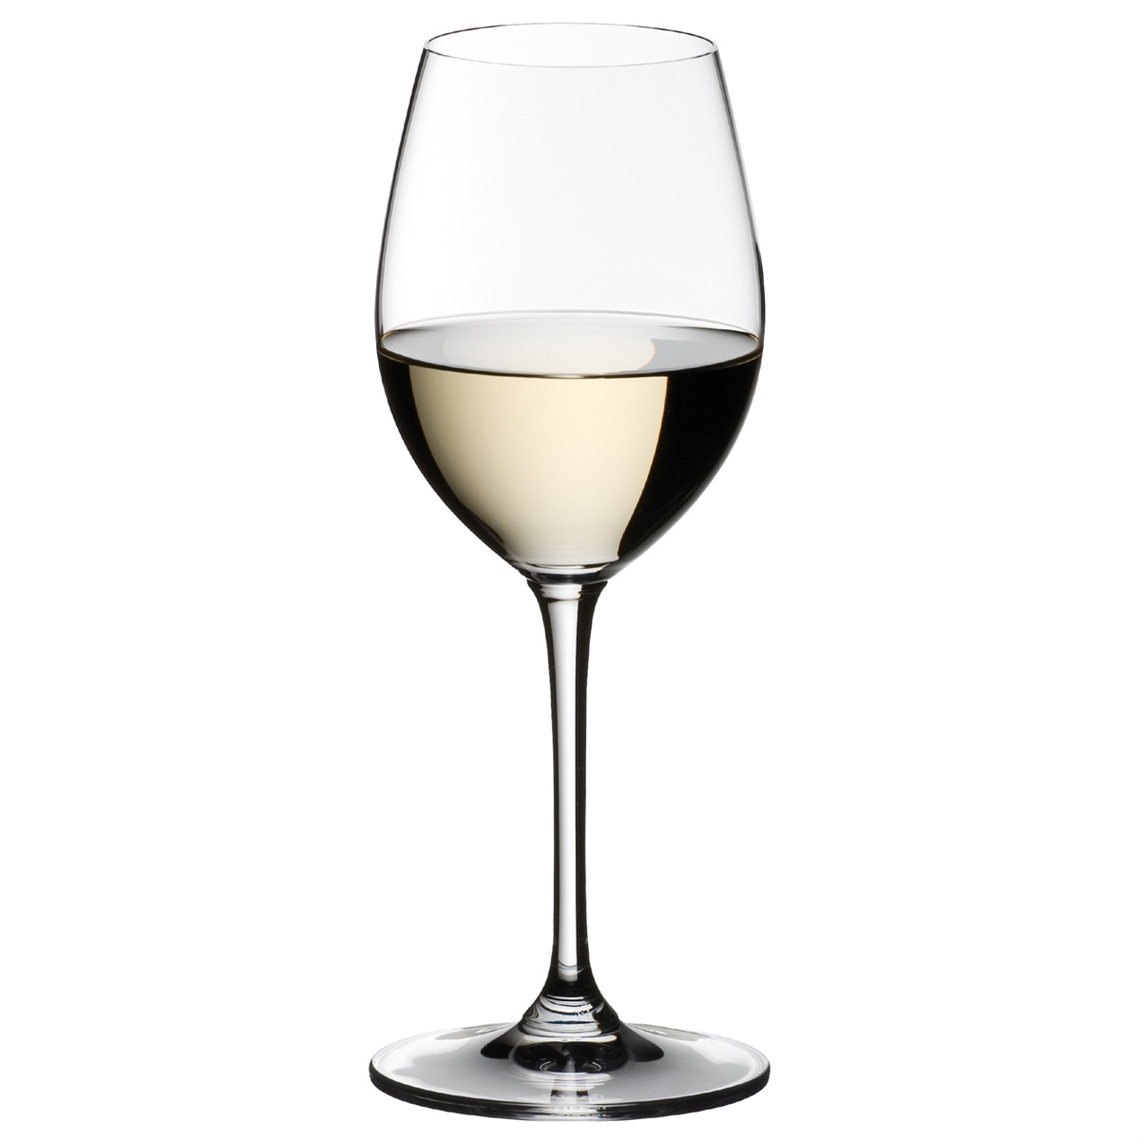 View more gin and tonic glasses from our Dessert Wine Glasses range